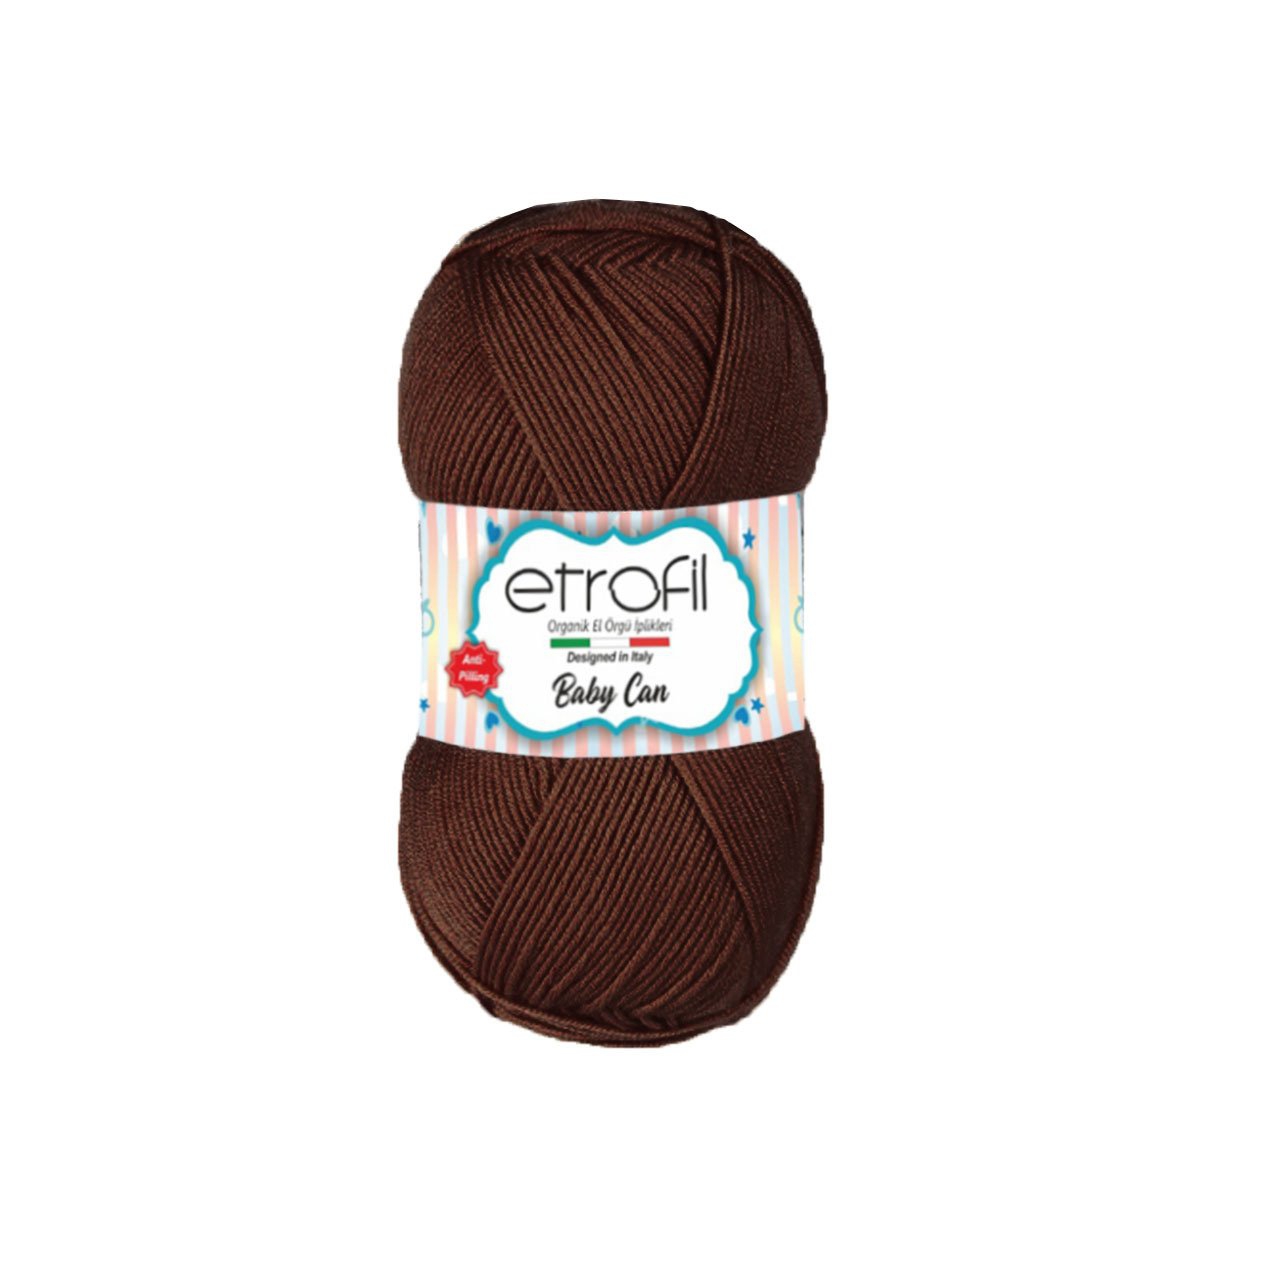 Etrofil Baby Can 80071